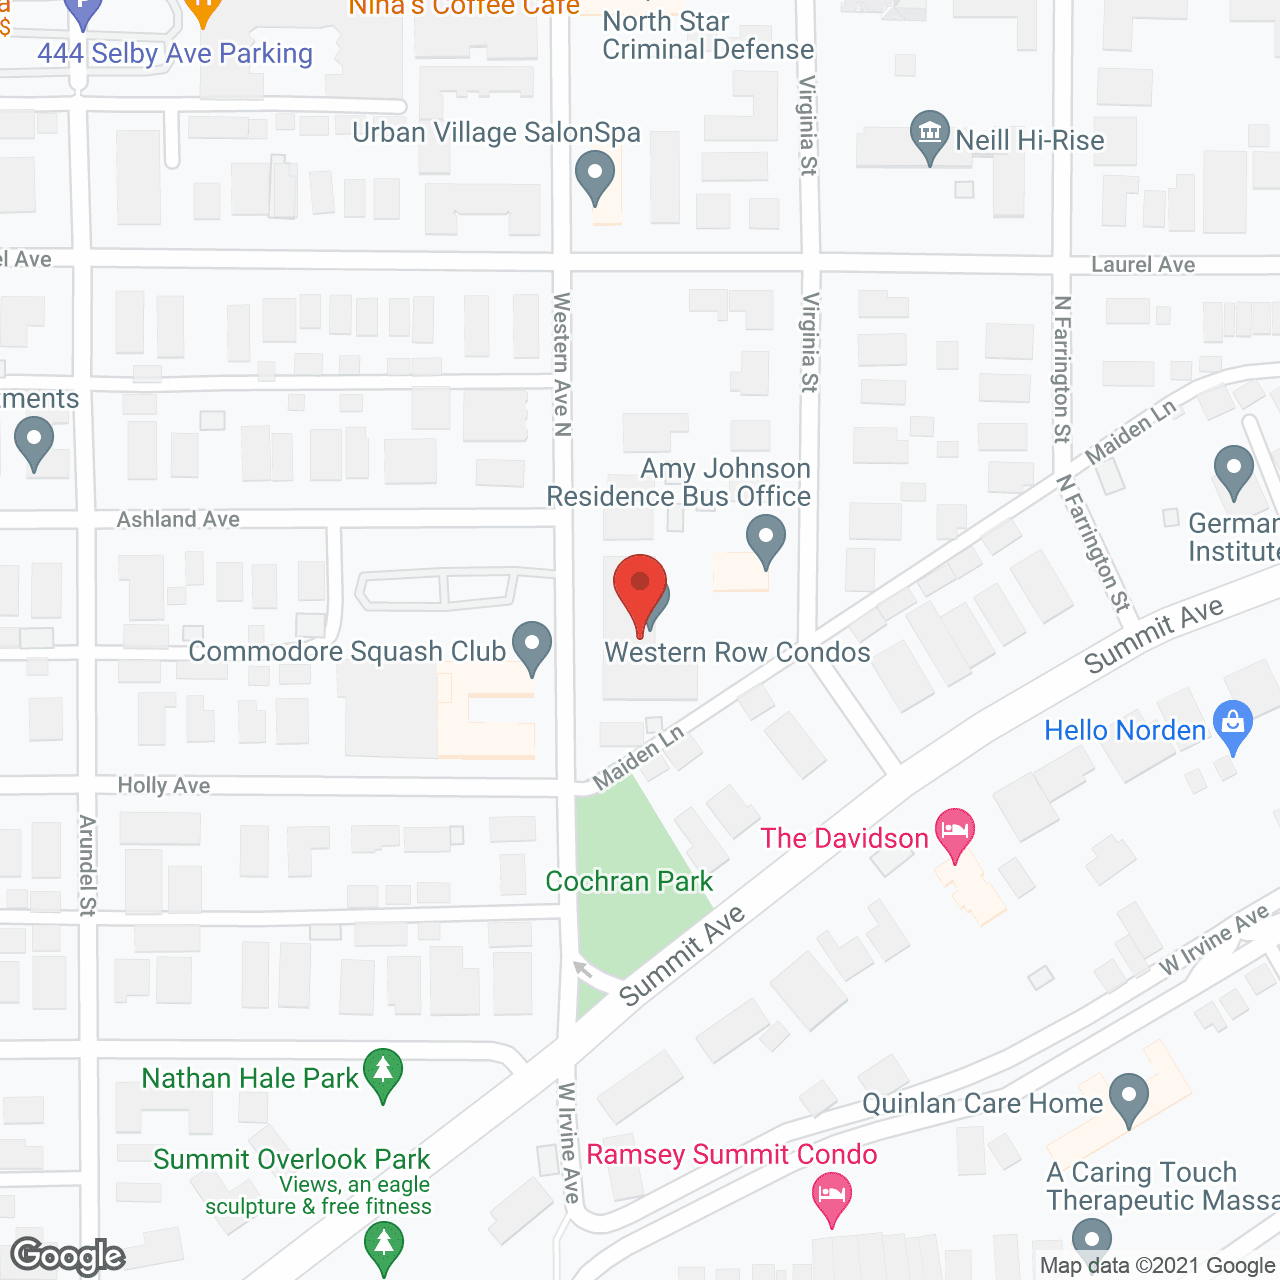 Summit Manor Health Care Ctr in google map